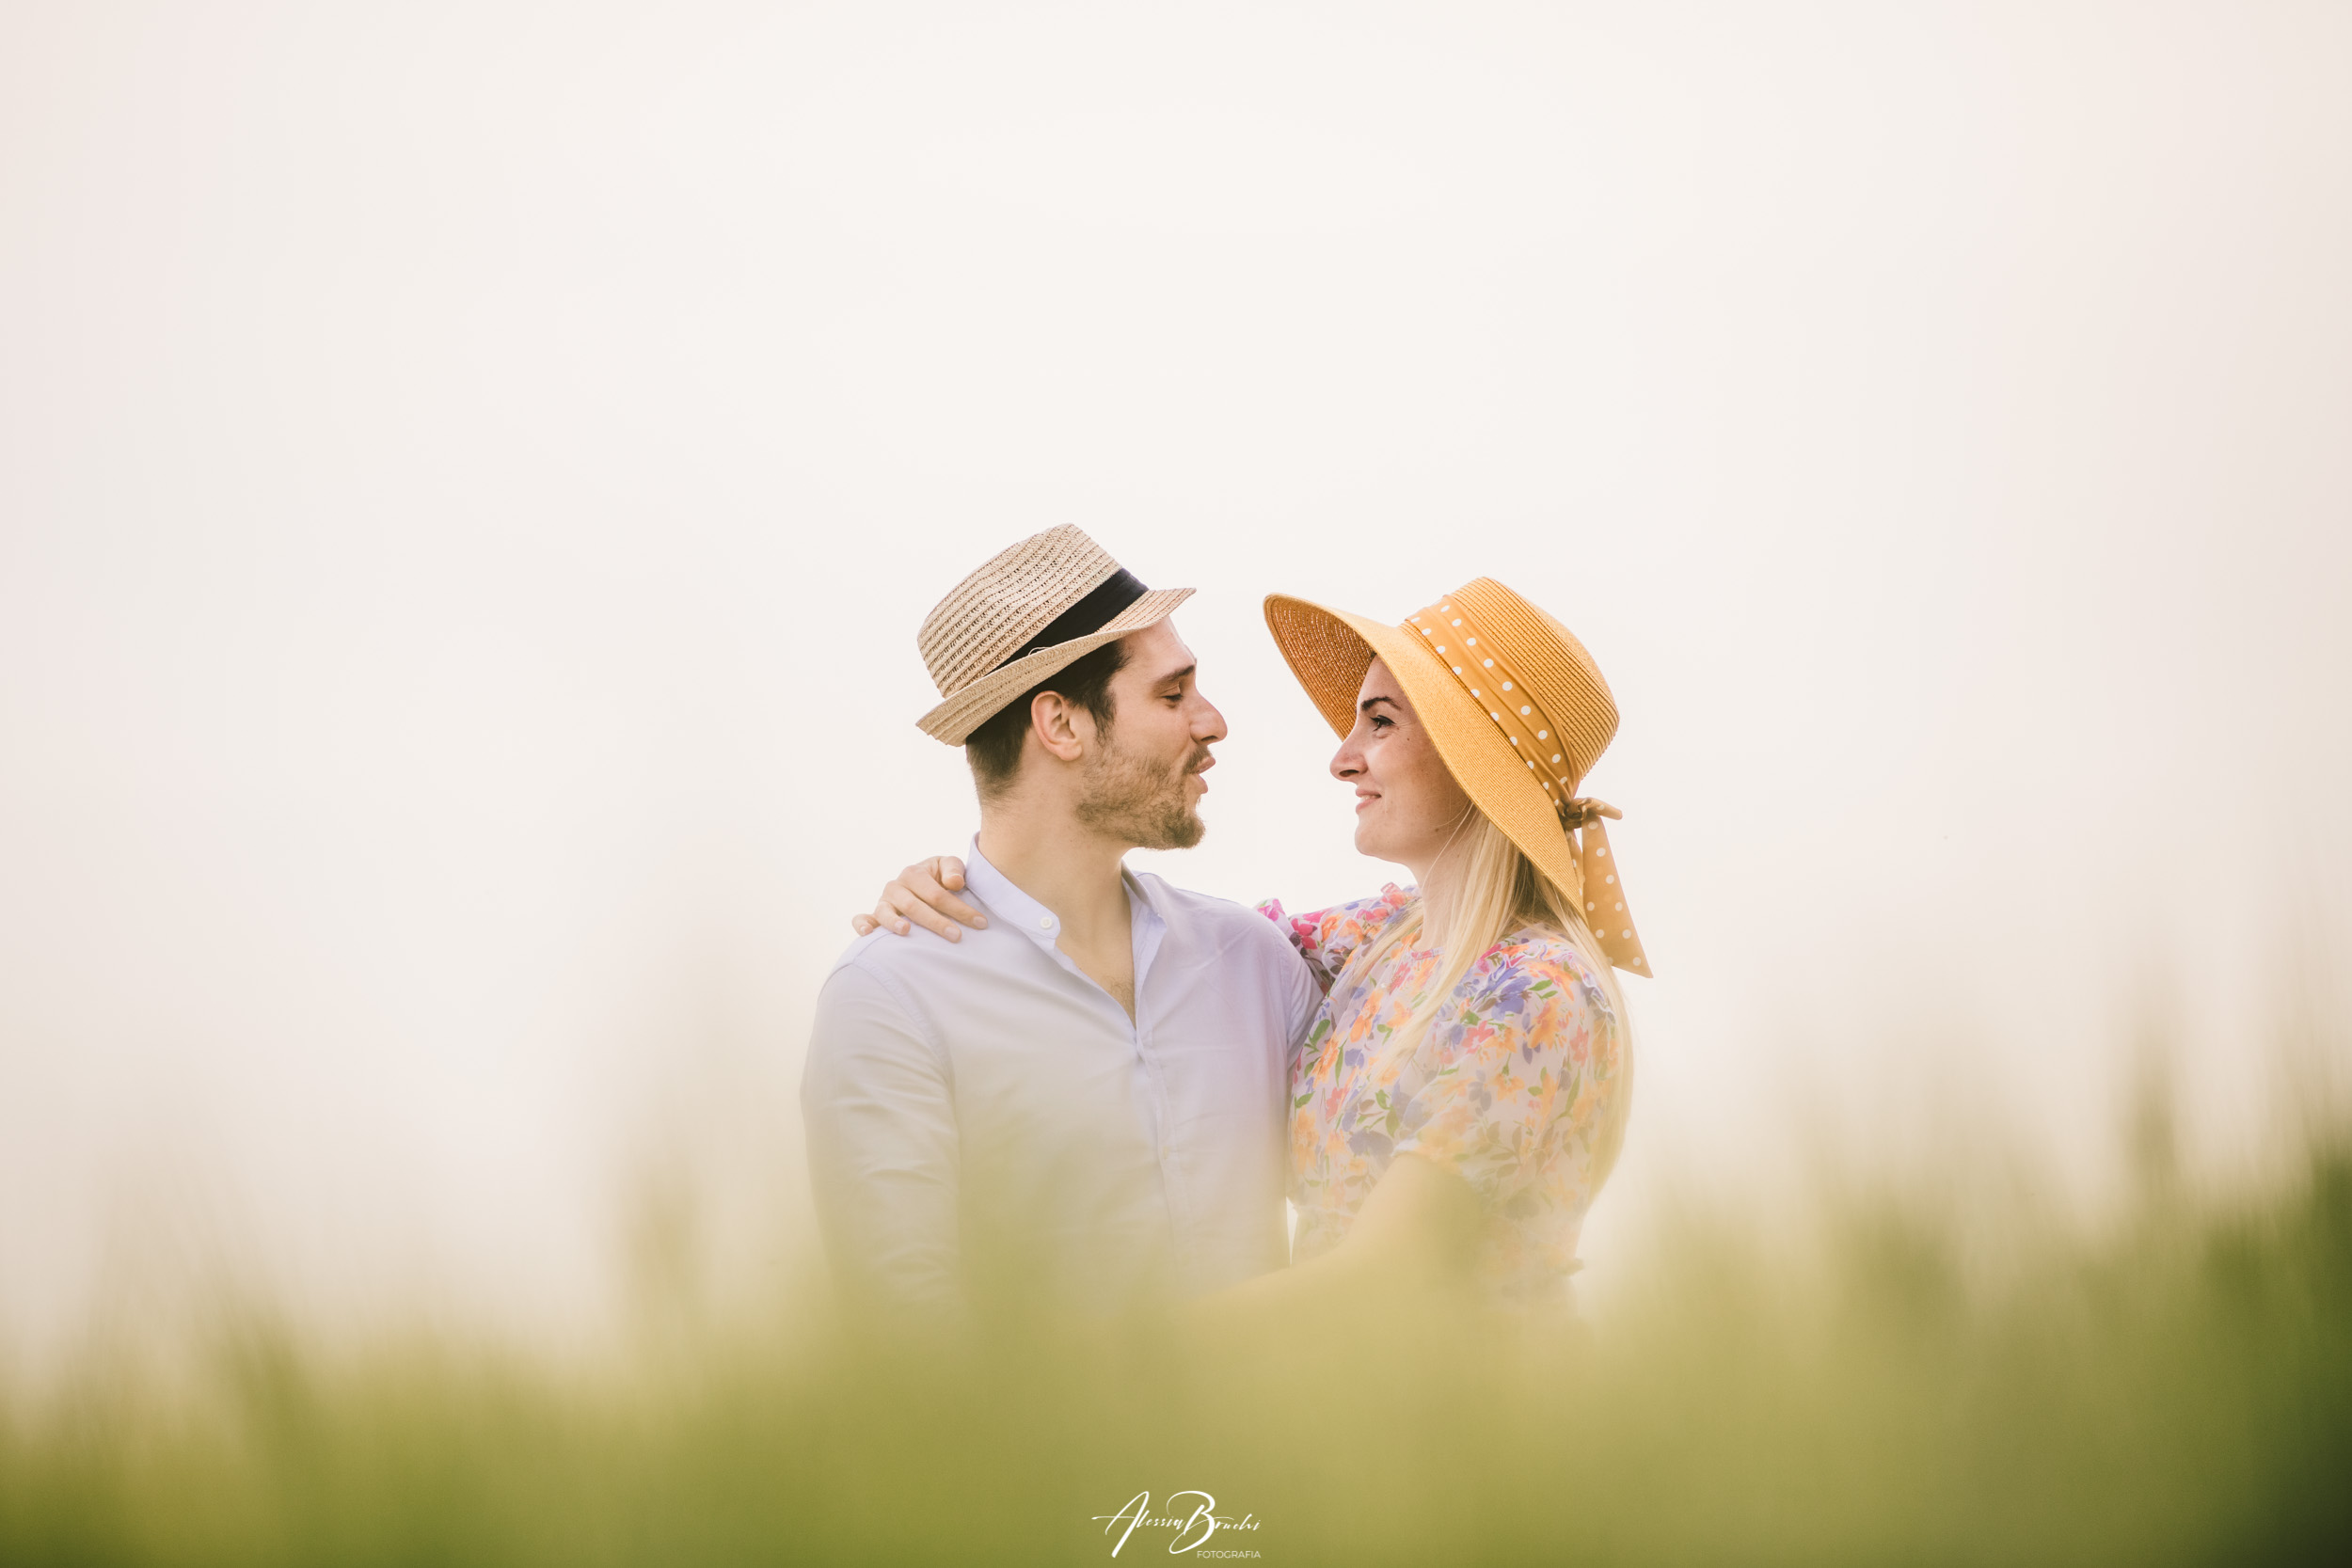 How to dress for an Engagement Photo Shooting?